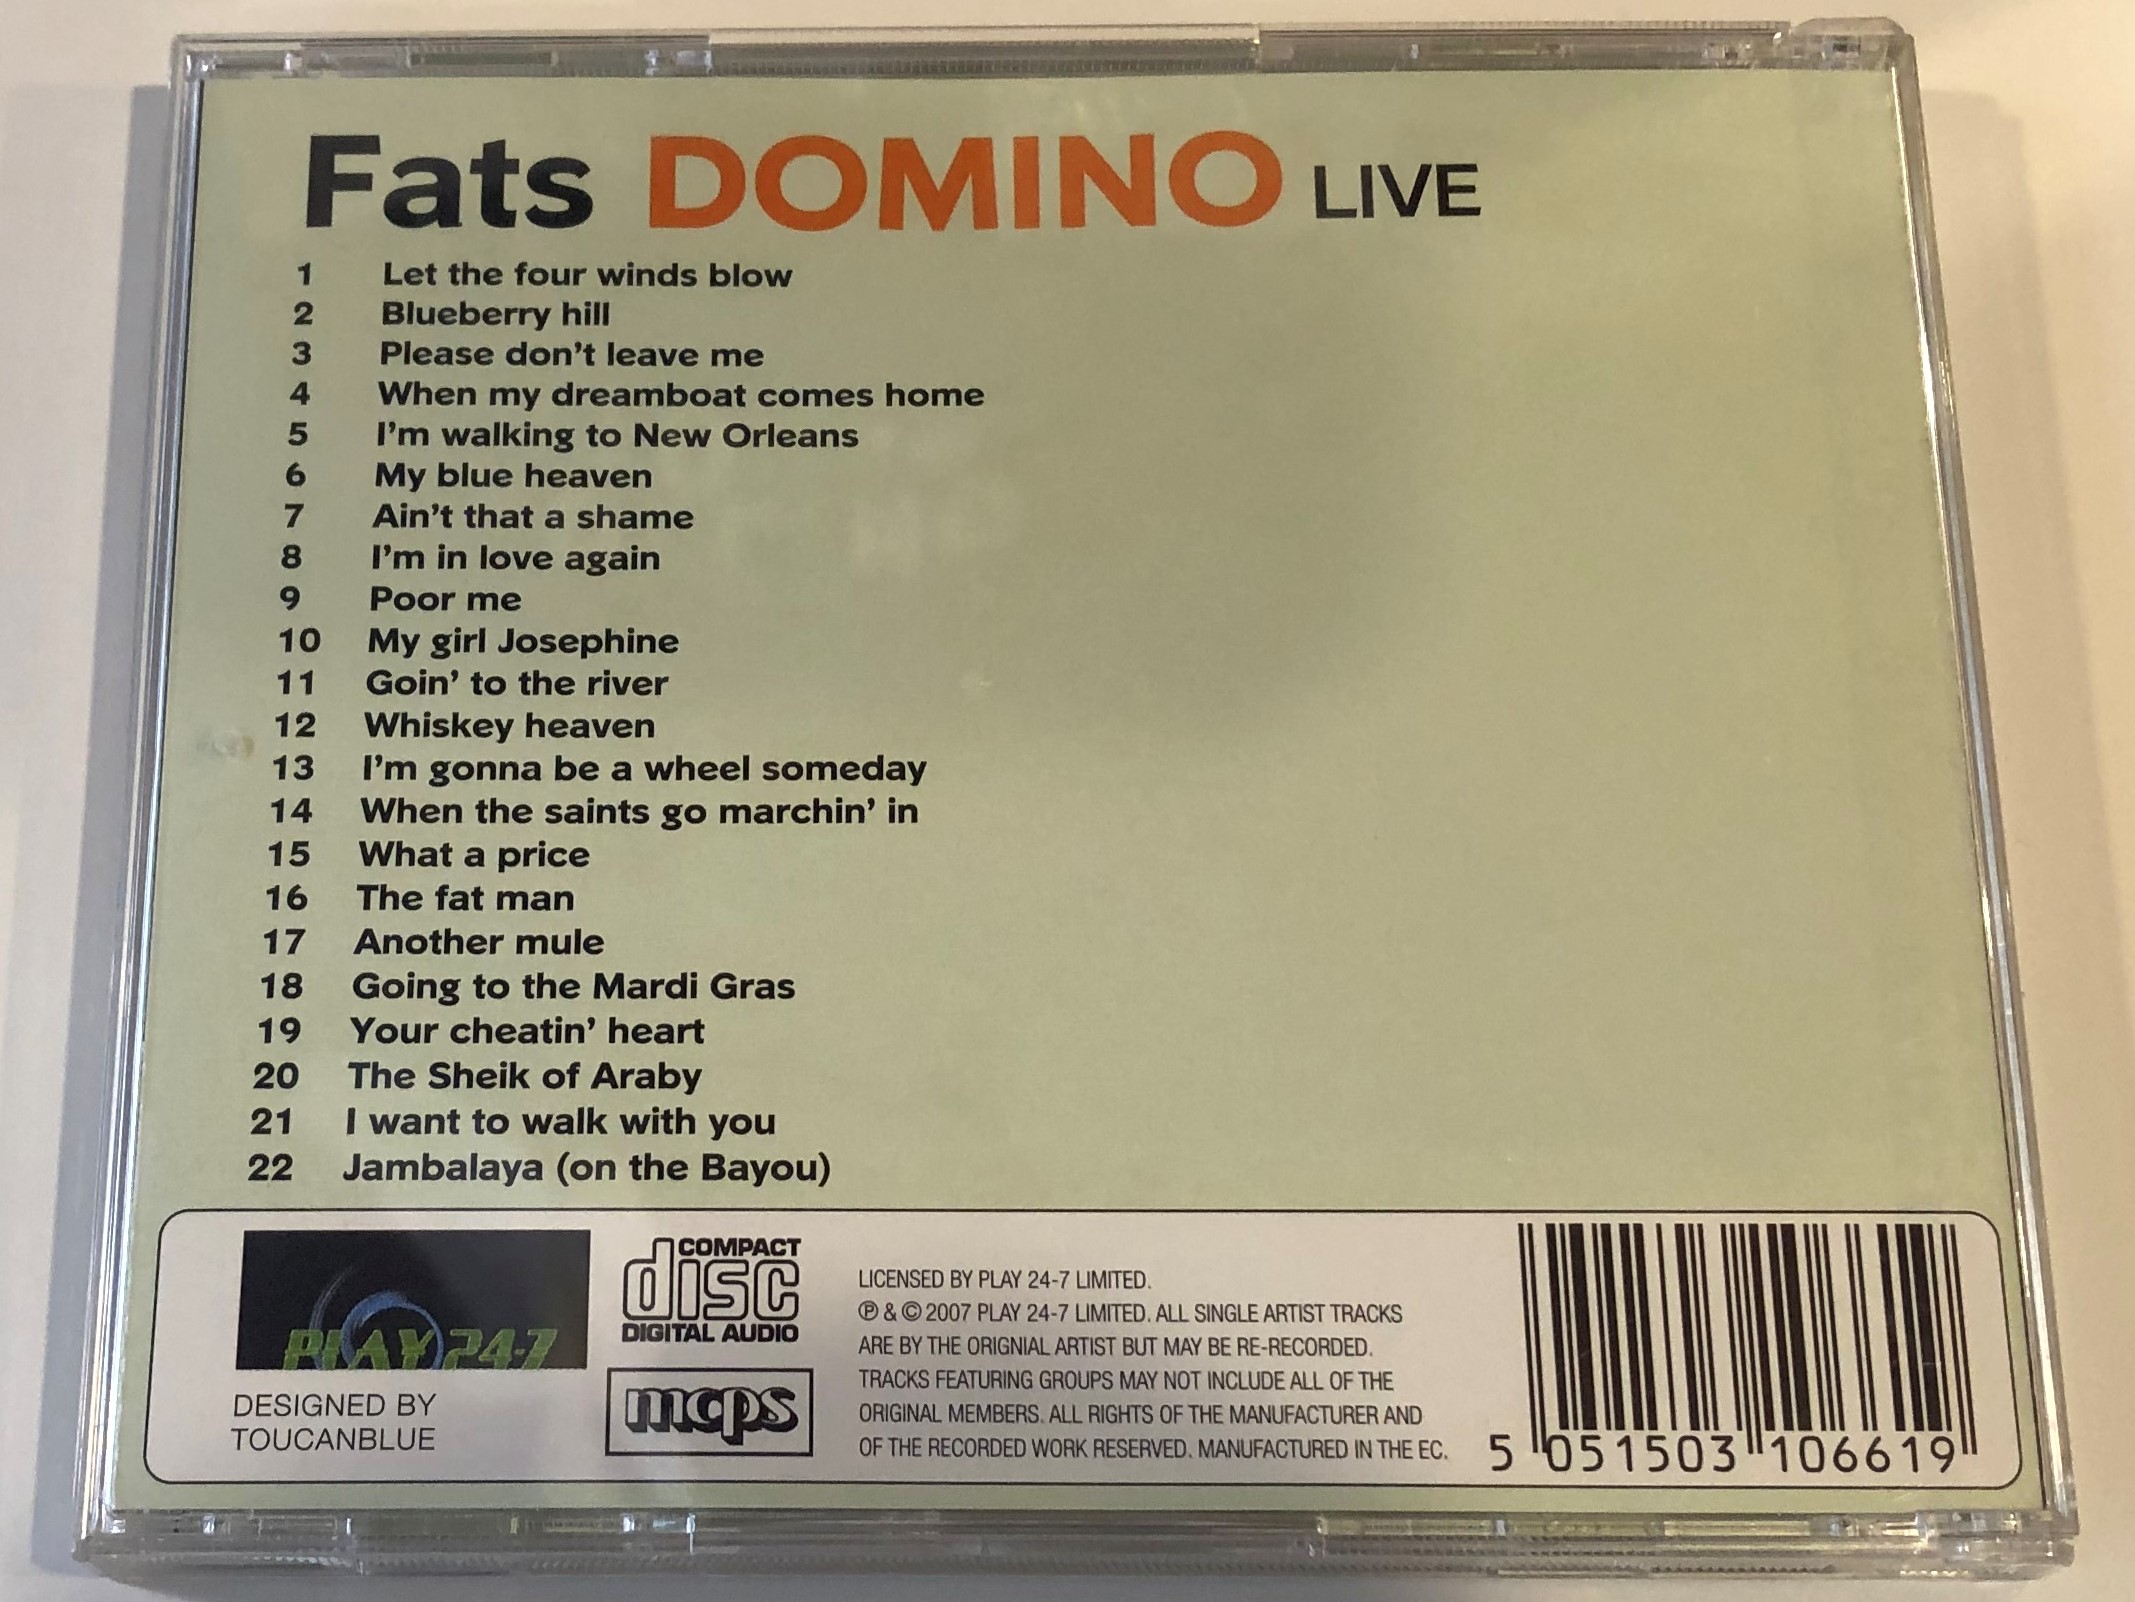 fats-domino-live-featuring-let-the-four-winds-blow-blueberry-hill-my-blue-heaven-when-the-saints-go-marchin-in-your-cheatin-heart-play-24-7-audio-cd-2007-5051503106619-2-.jpg